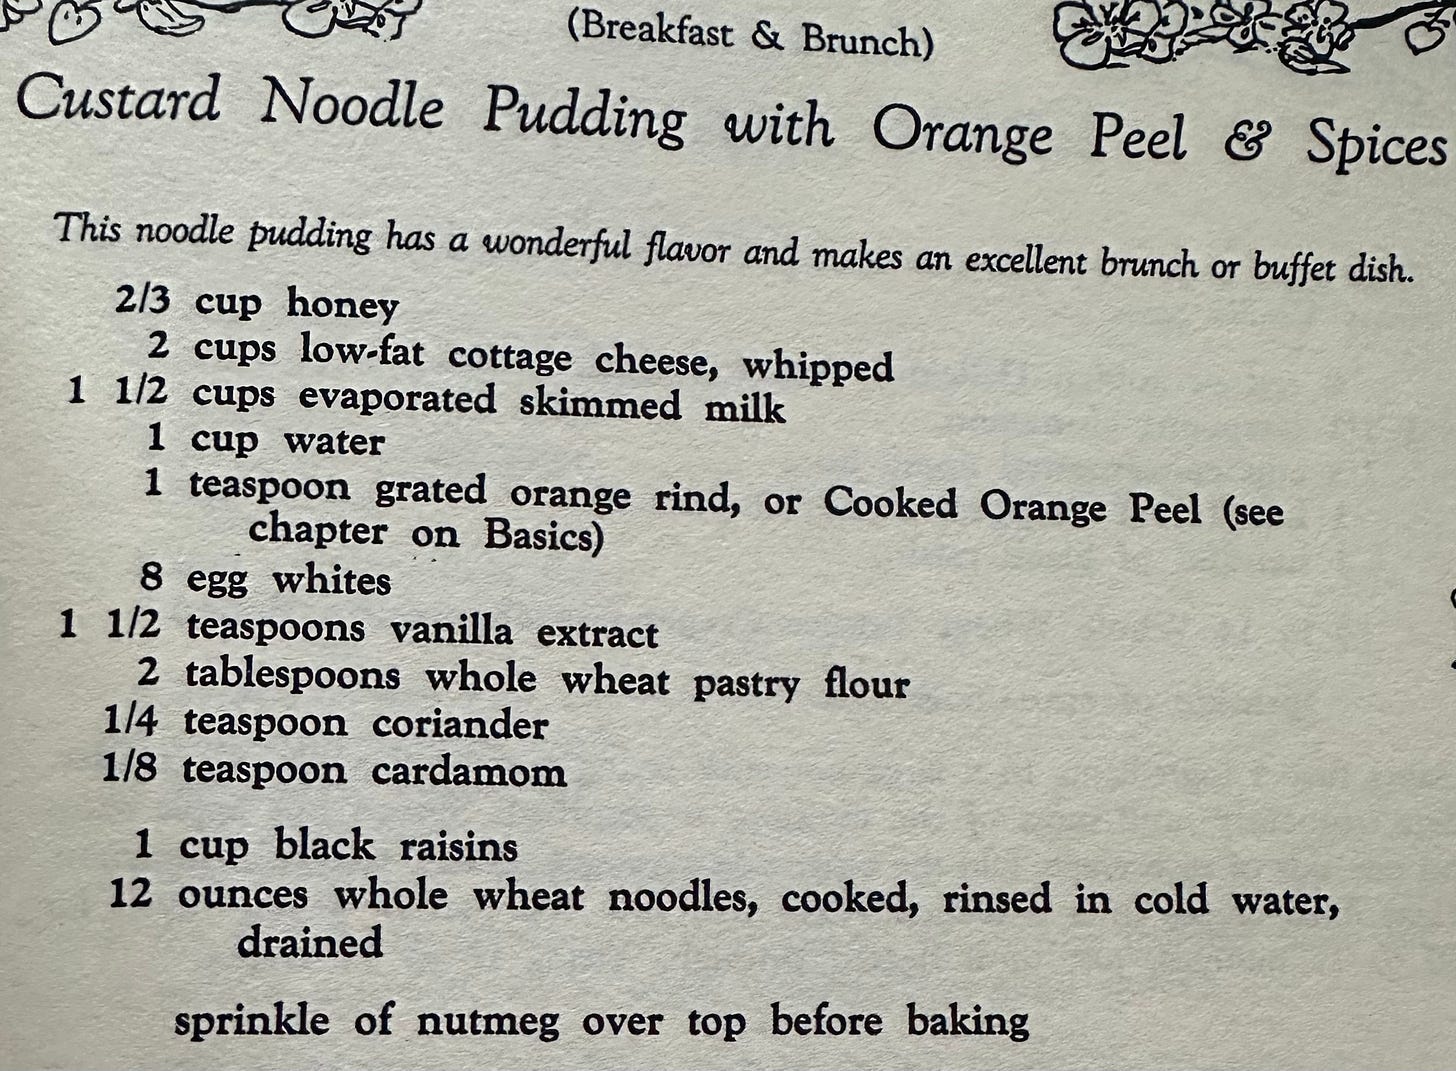 Recipe for custard noodle pudding with orange peel and spices.